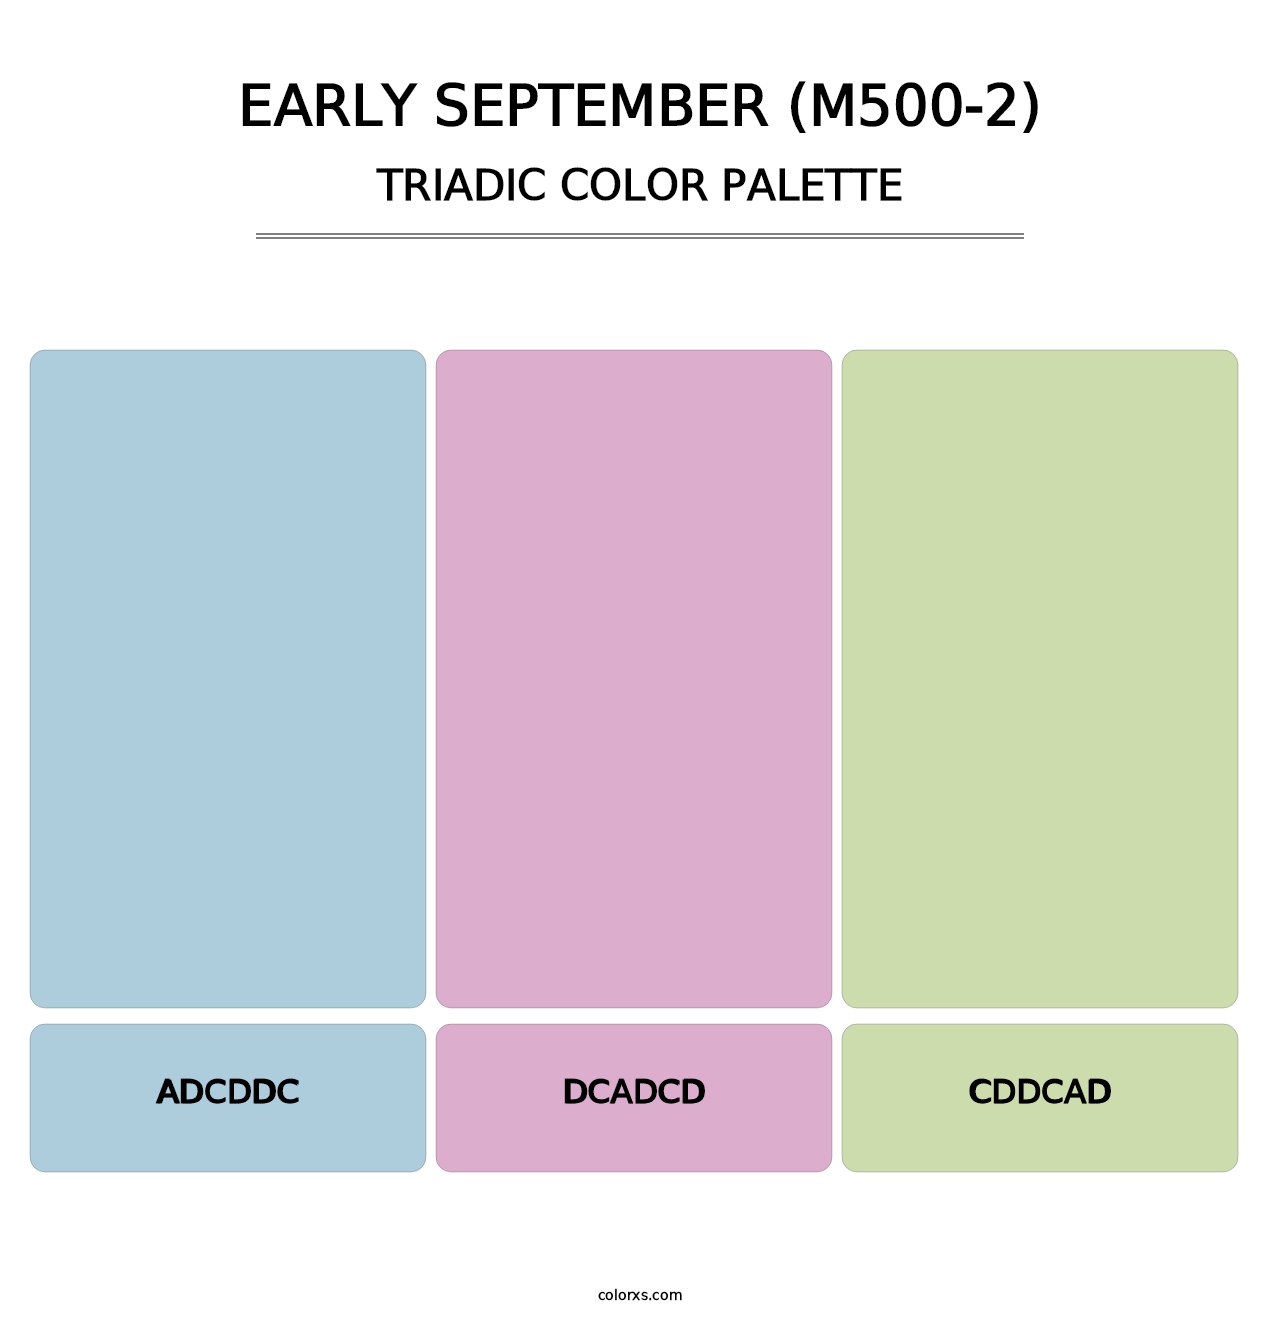 Early September (M500-2) - Triadic Color Palette